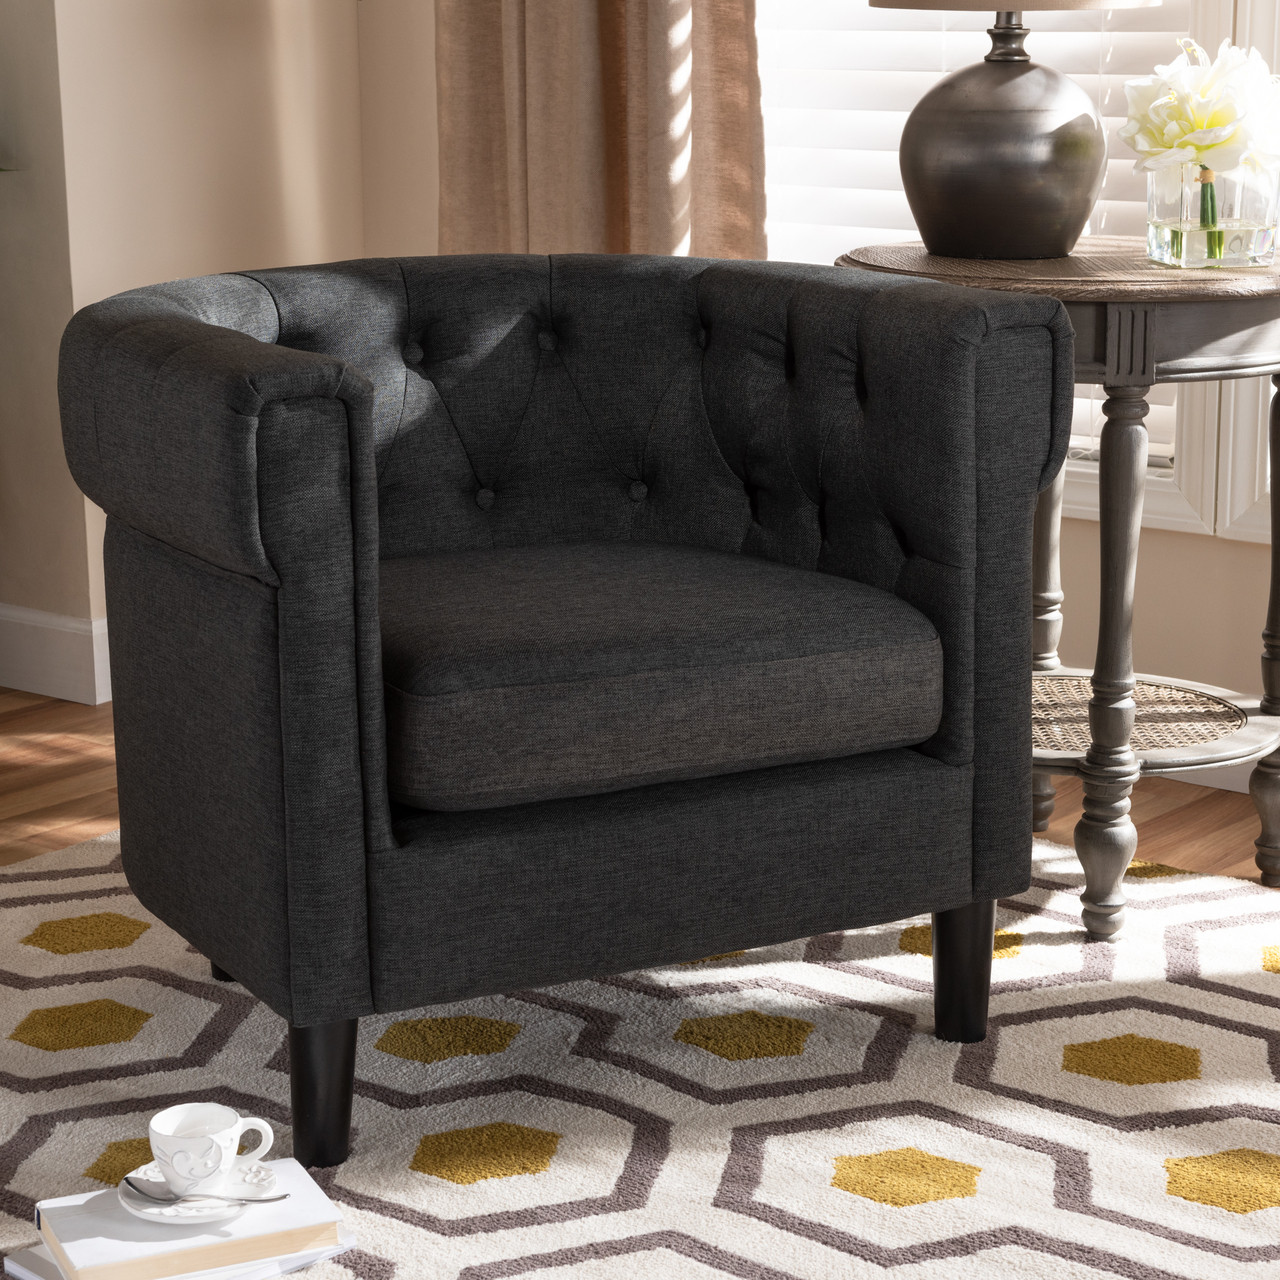 An upholstered chair for the living room will become the highlight of your design